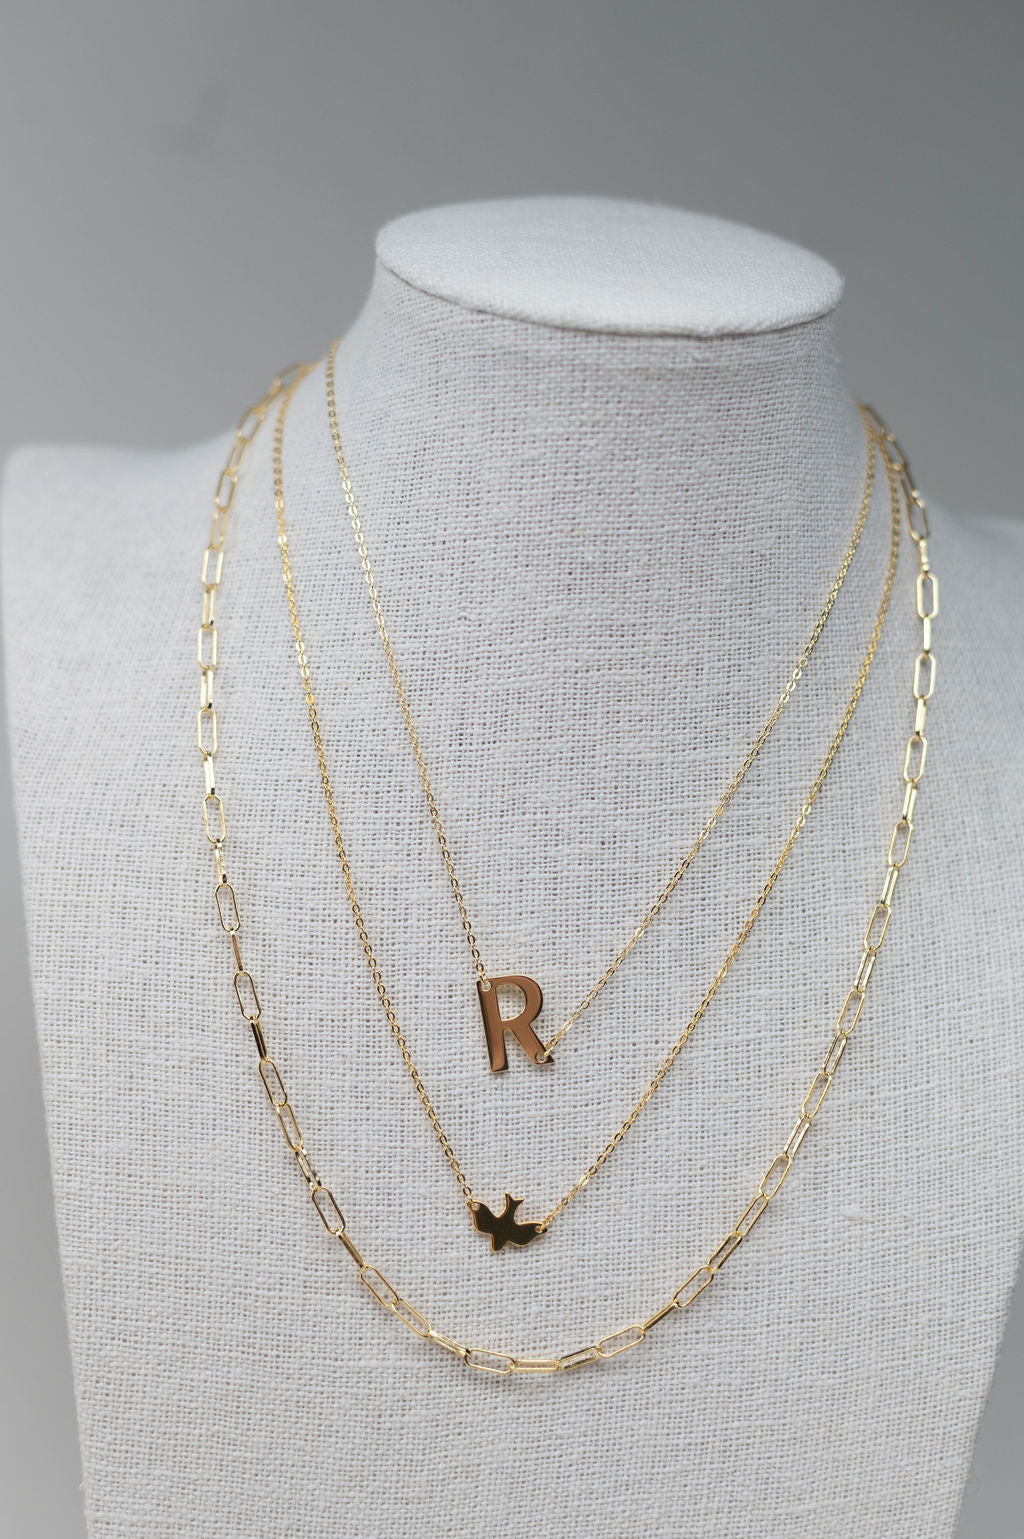 The Company 'Initial Me' Pendant - R